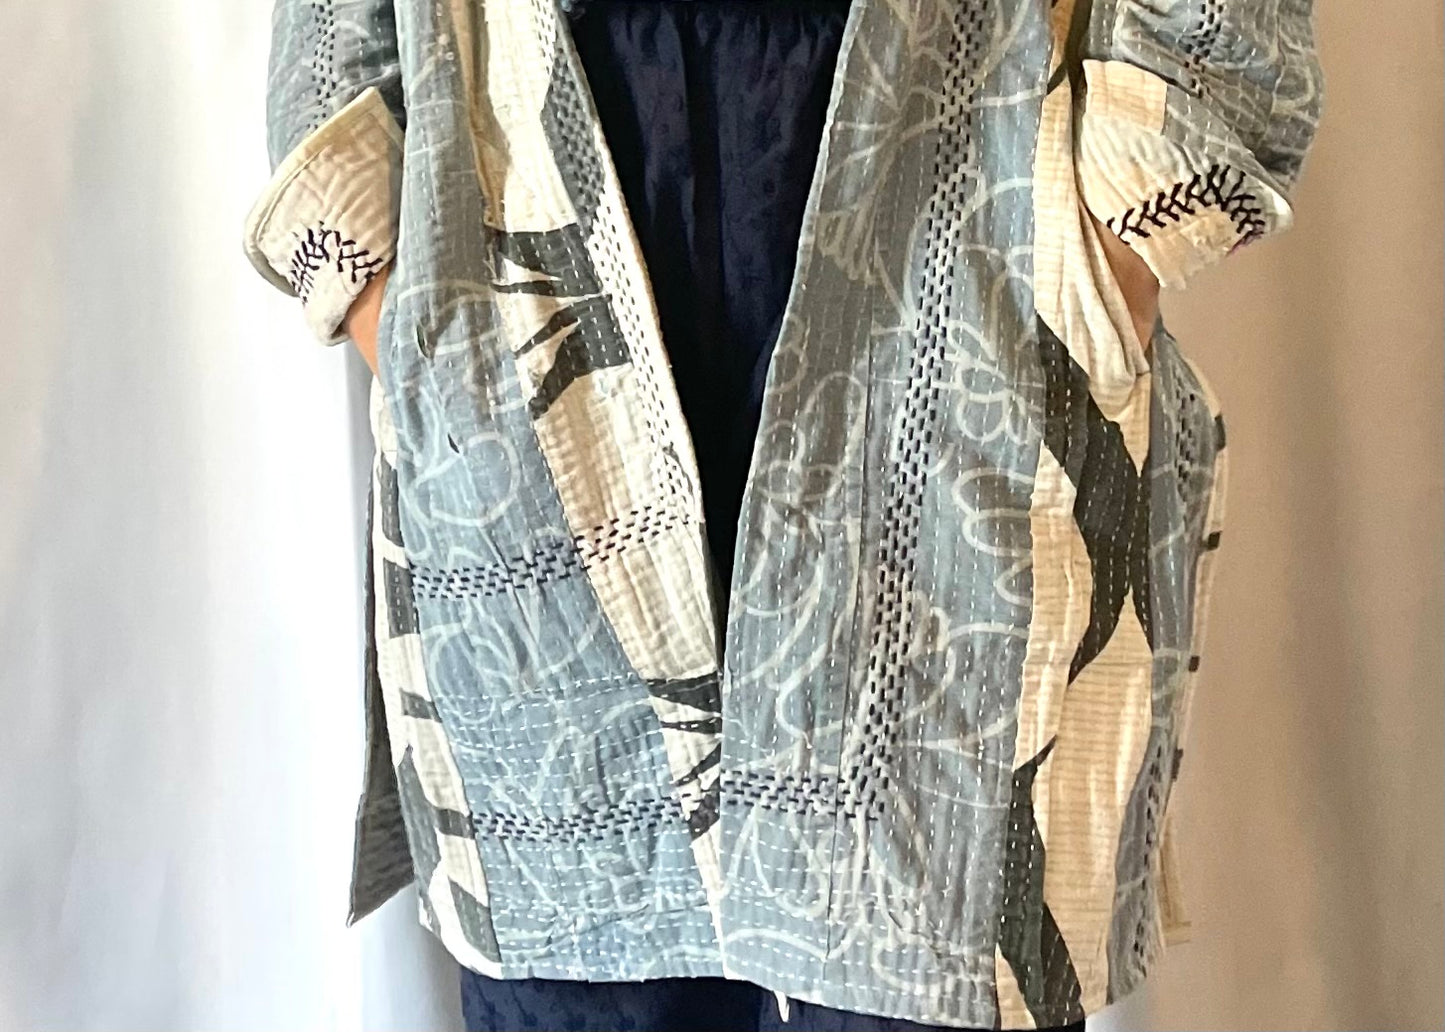 Blue and Grey Longline Kantha Quilted Jacket | Recycled Saris | Sustainable Fashion | Quilted Jacket | Kantha Embroidery | Handcrafted - DharBazaar